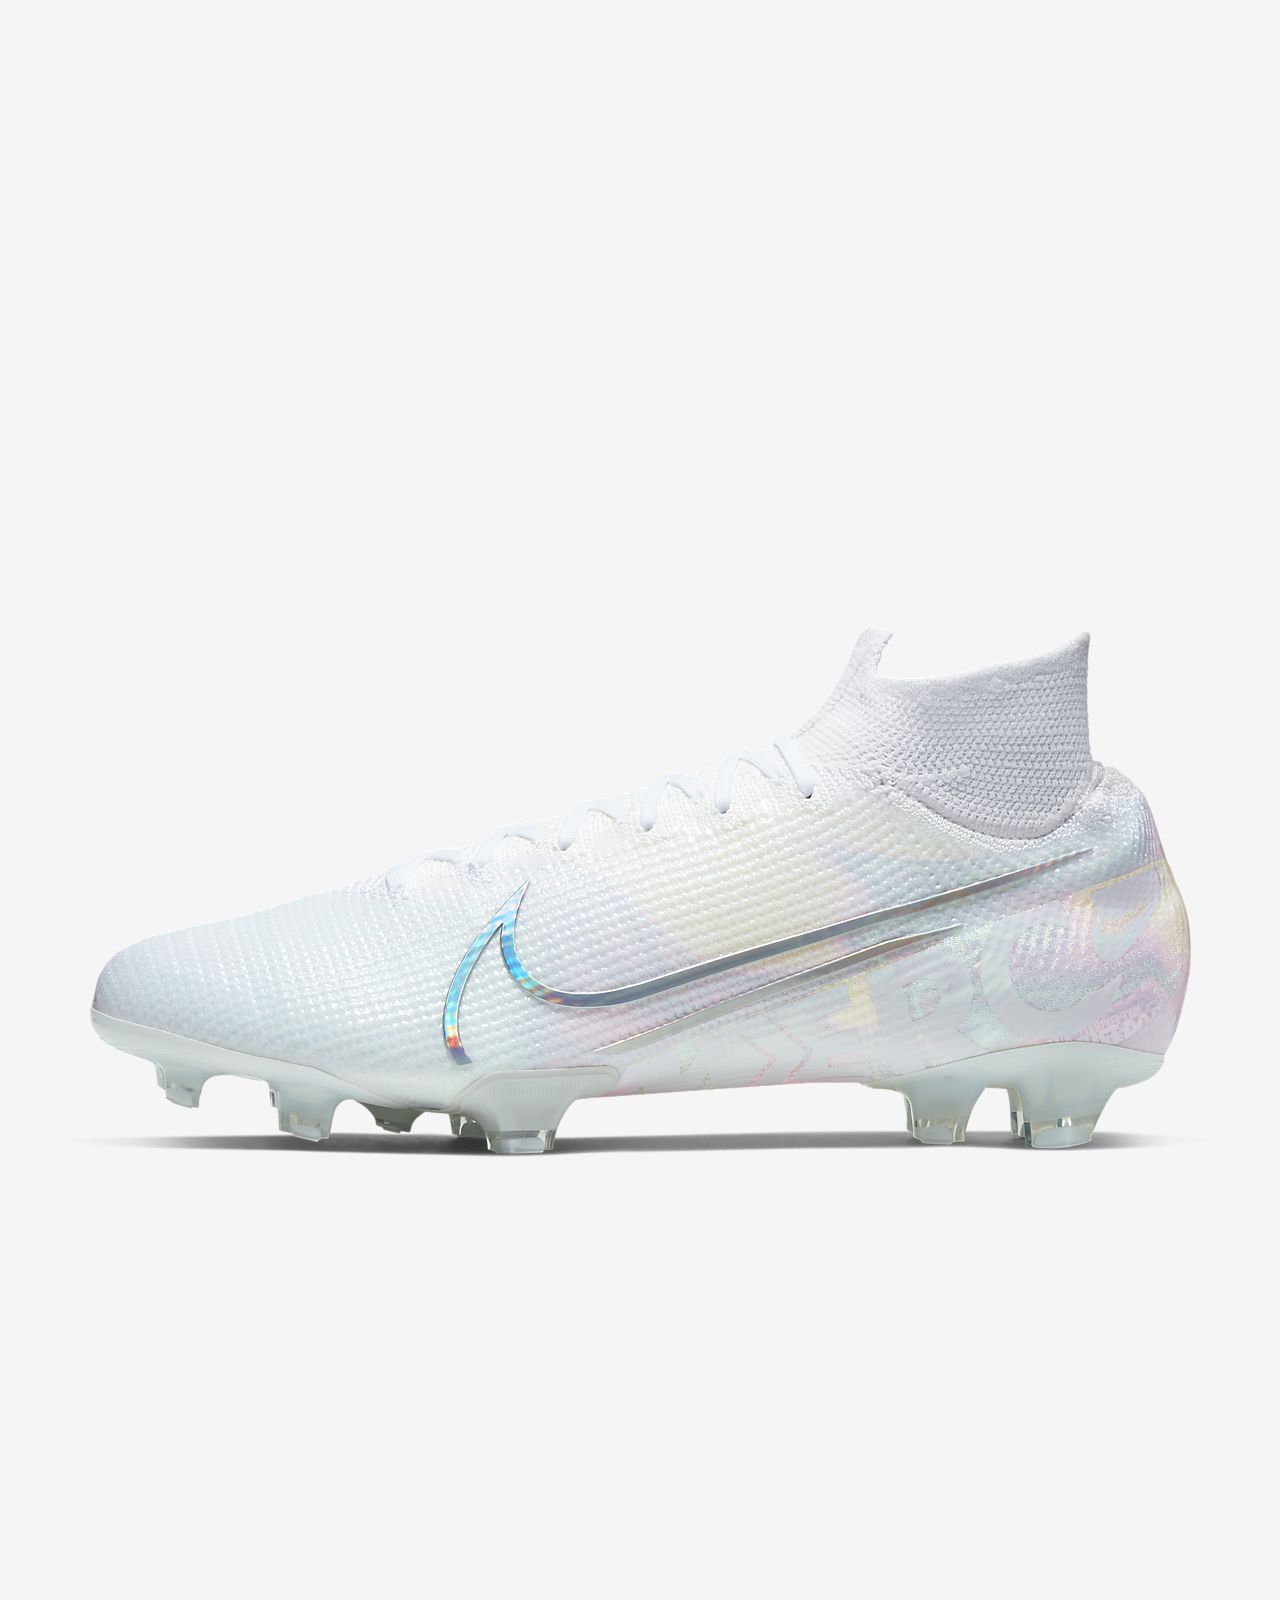 Nike Mercurial Superfly 7 Pro Fg Firm Ground Football Boot